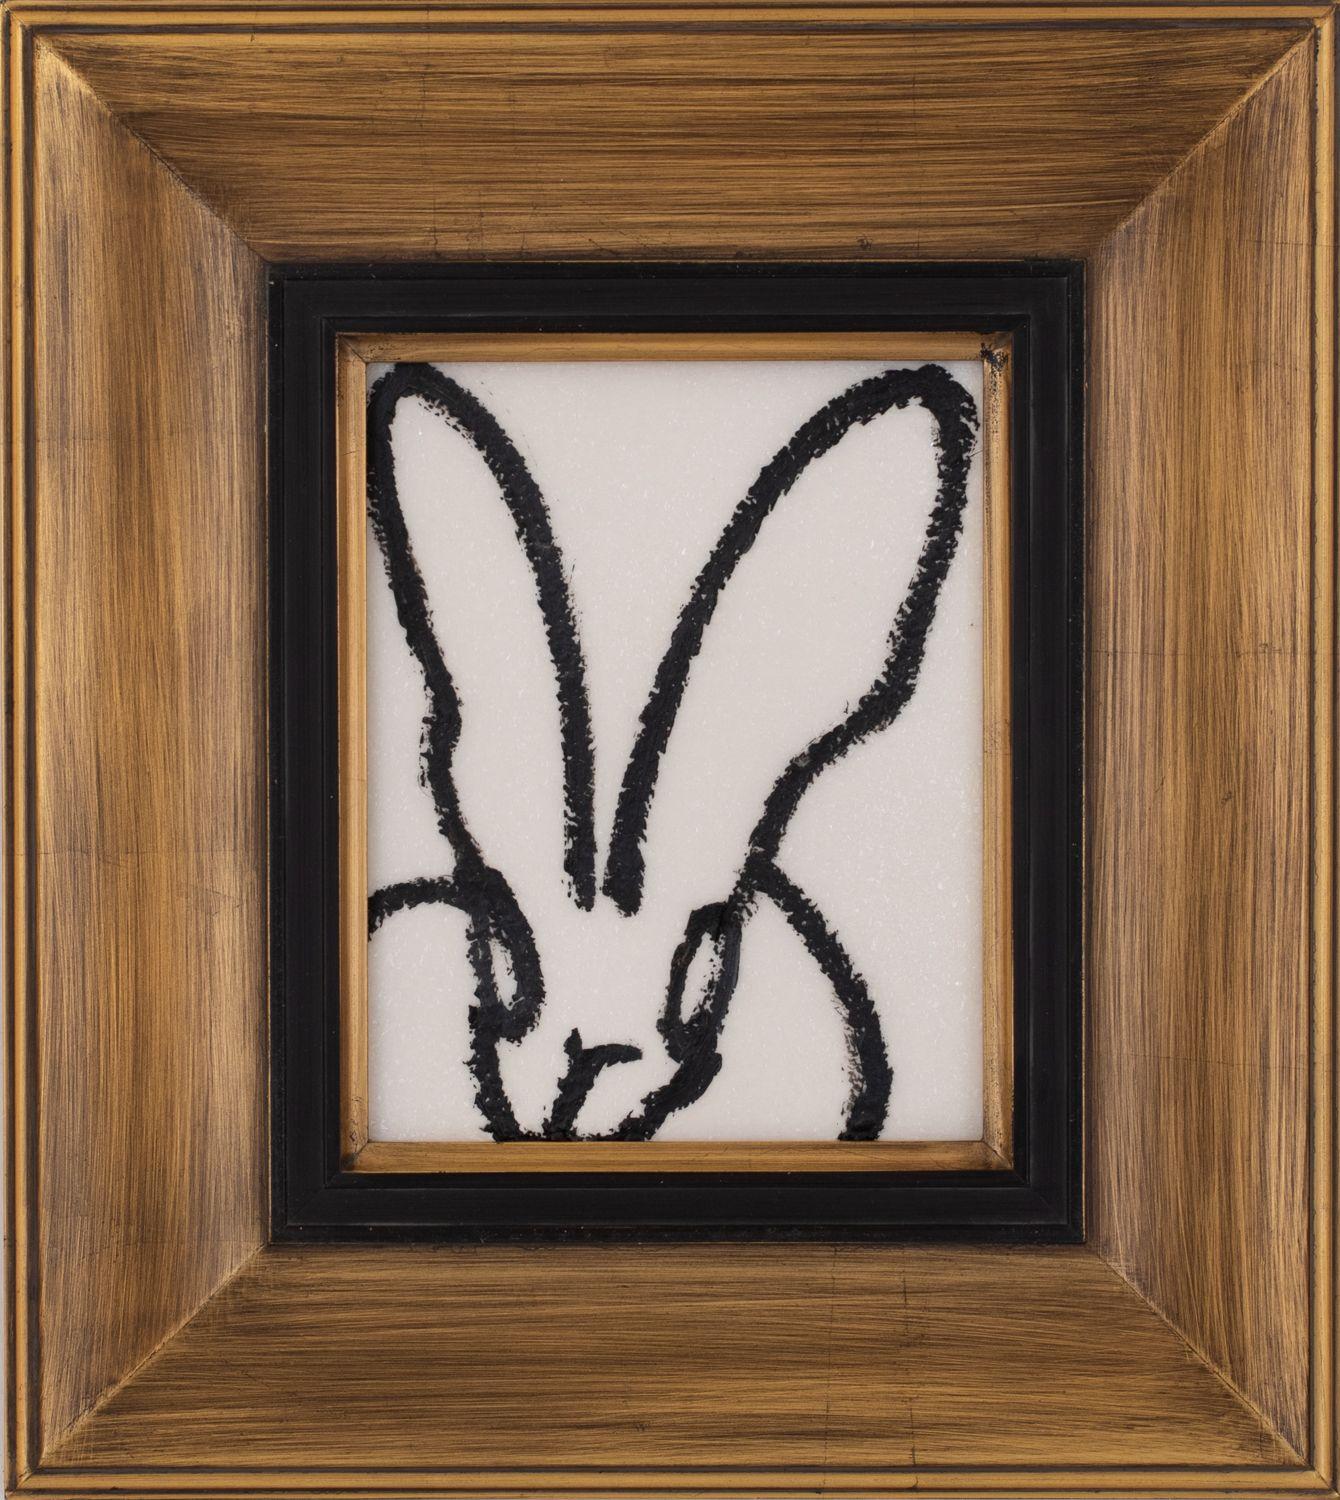 Renowned artist Hunt Slonem's "Black Bunny on White" 10x8 black and white oil and diamond dust painting on wood board of a contemporary abstract rabbit in his choice of antique framing.

*Painting is framed - Please note that not all Hunt Slonem